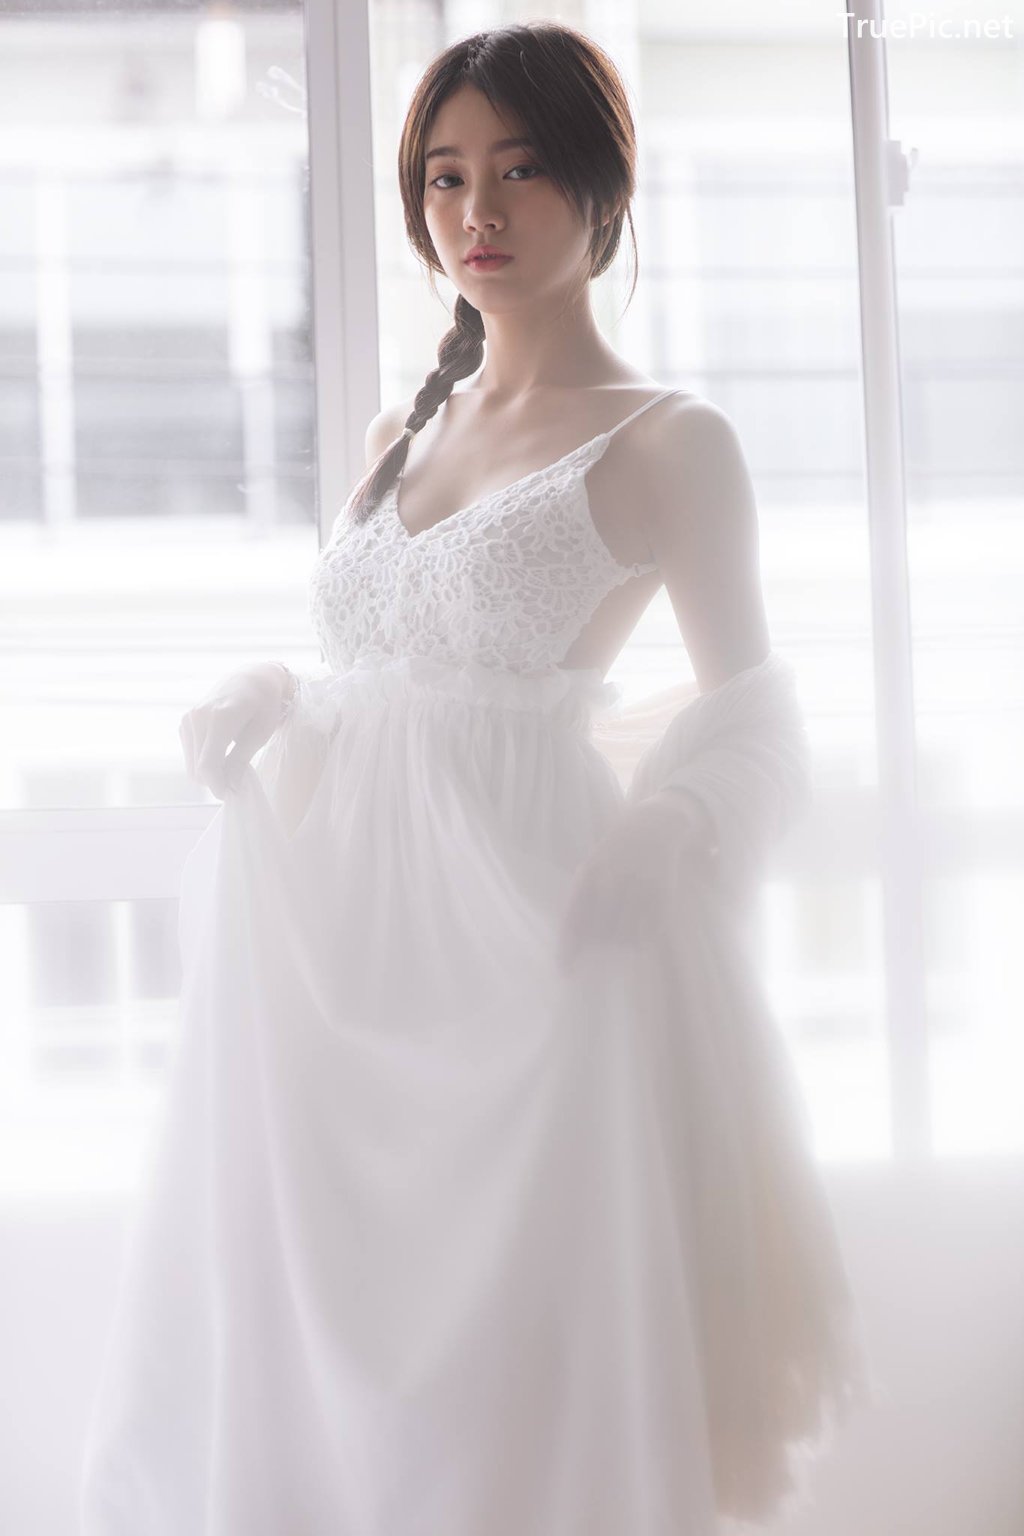 Image Thailand Model - Pimploy Chitranapawong - Beautiful In White - TruePic.net - Picture-11